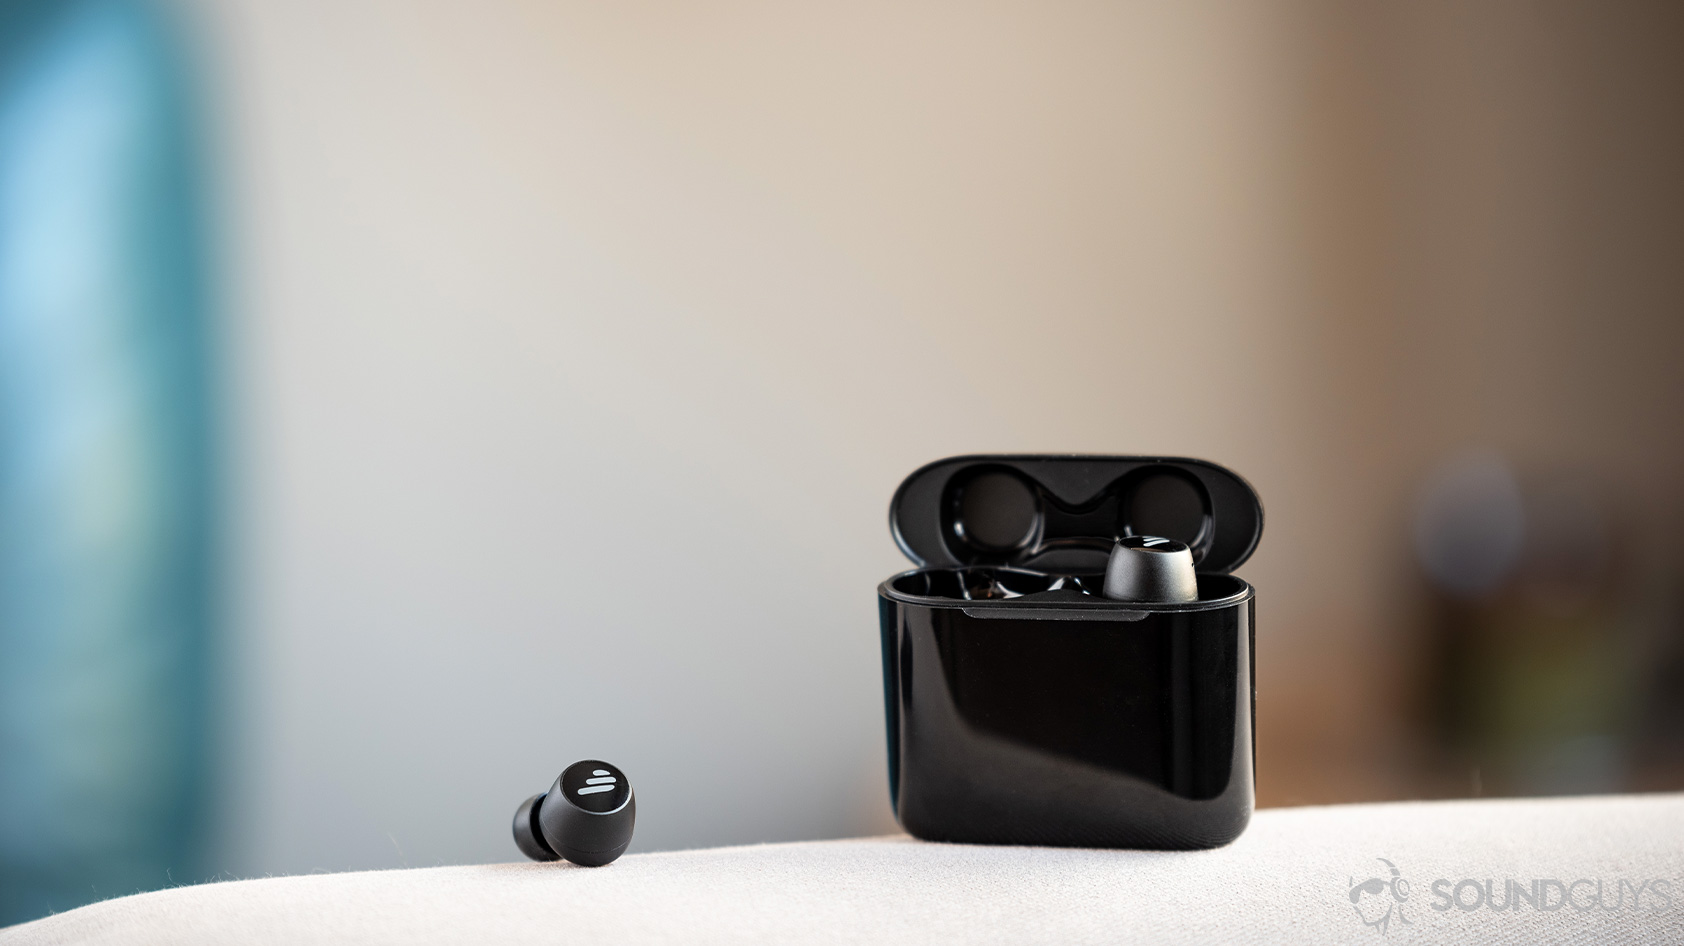 A picture of the Edifier TWS6 true wireless earbuds in black on a couch arm.